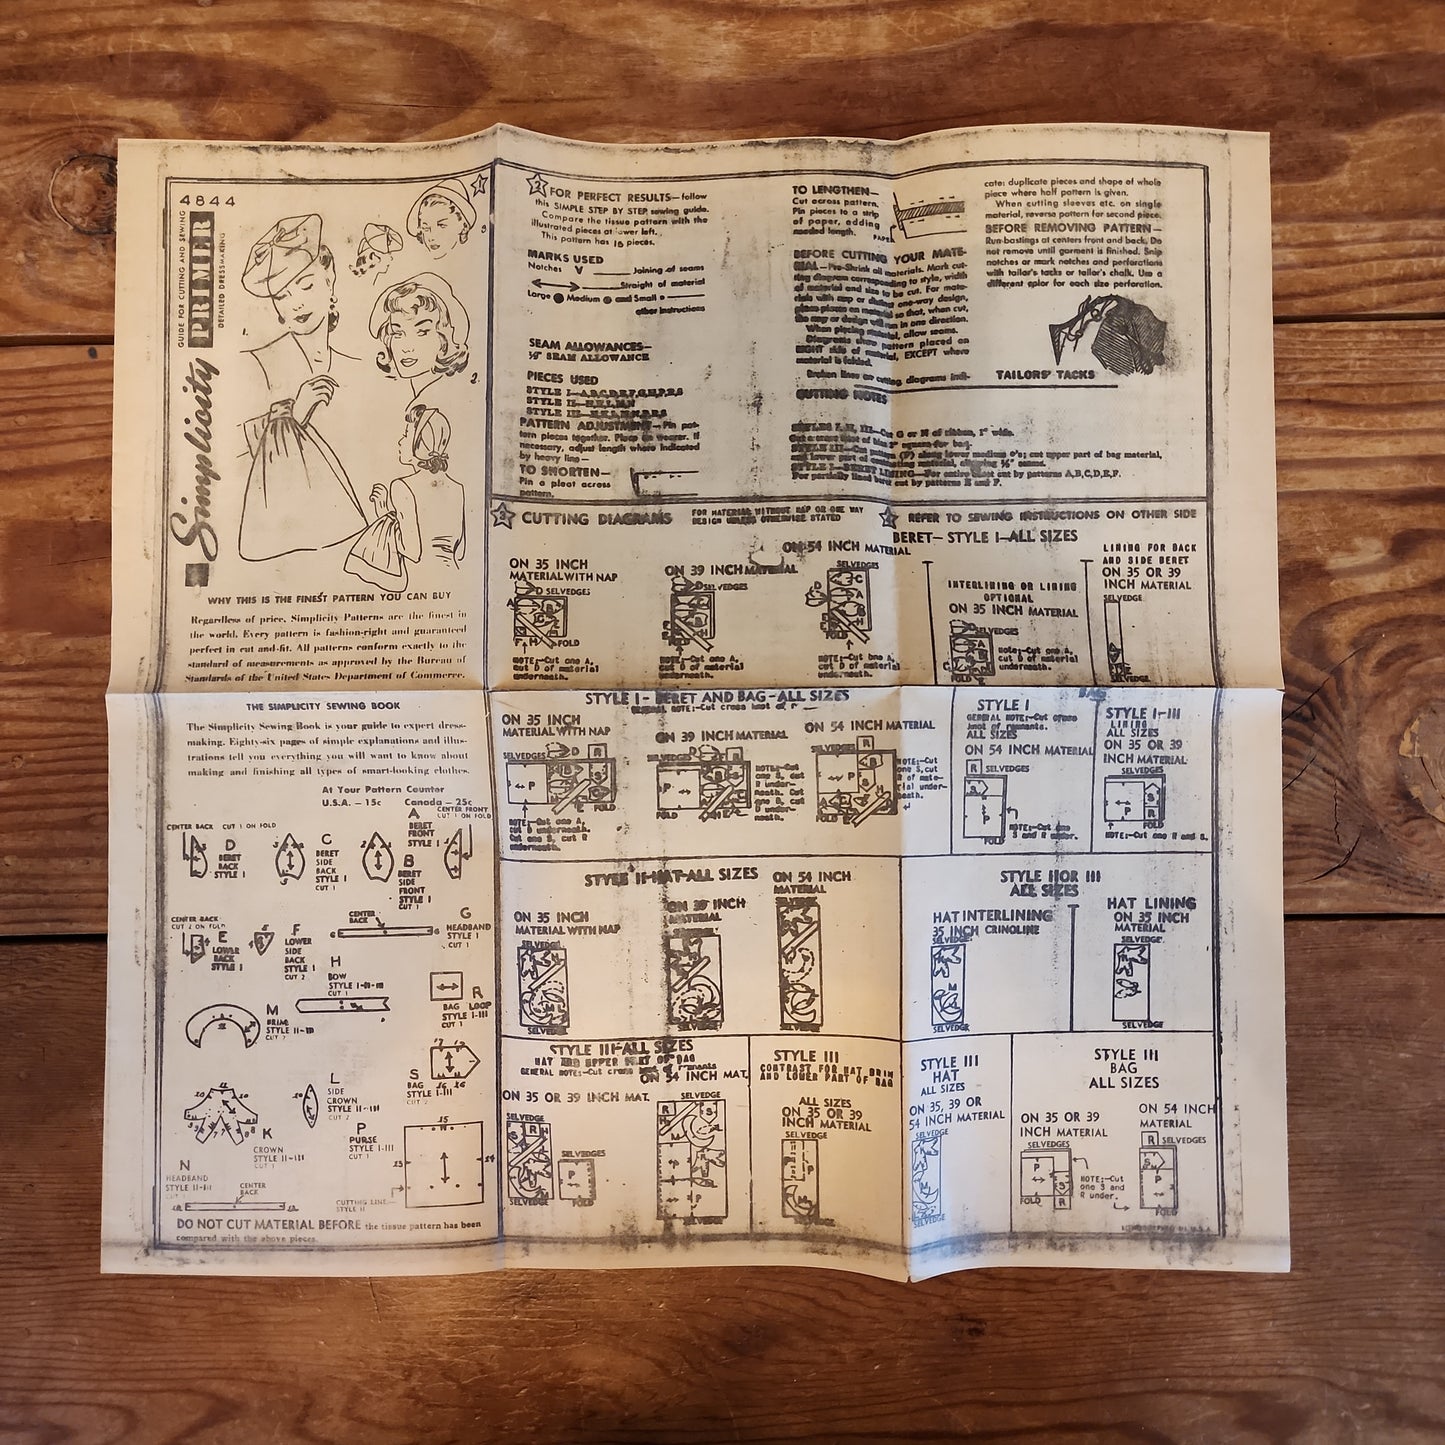 1940s Sewing Pattern 4844 by Simplicity for Hat and Bag